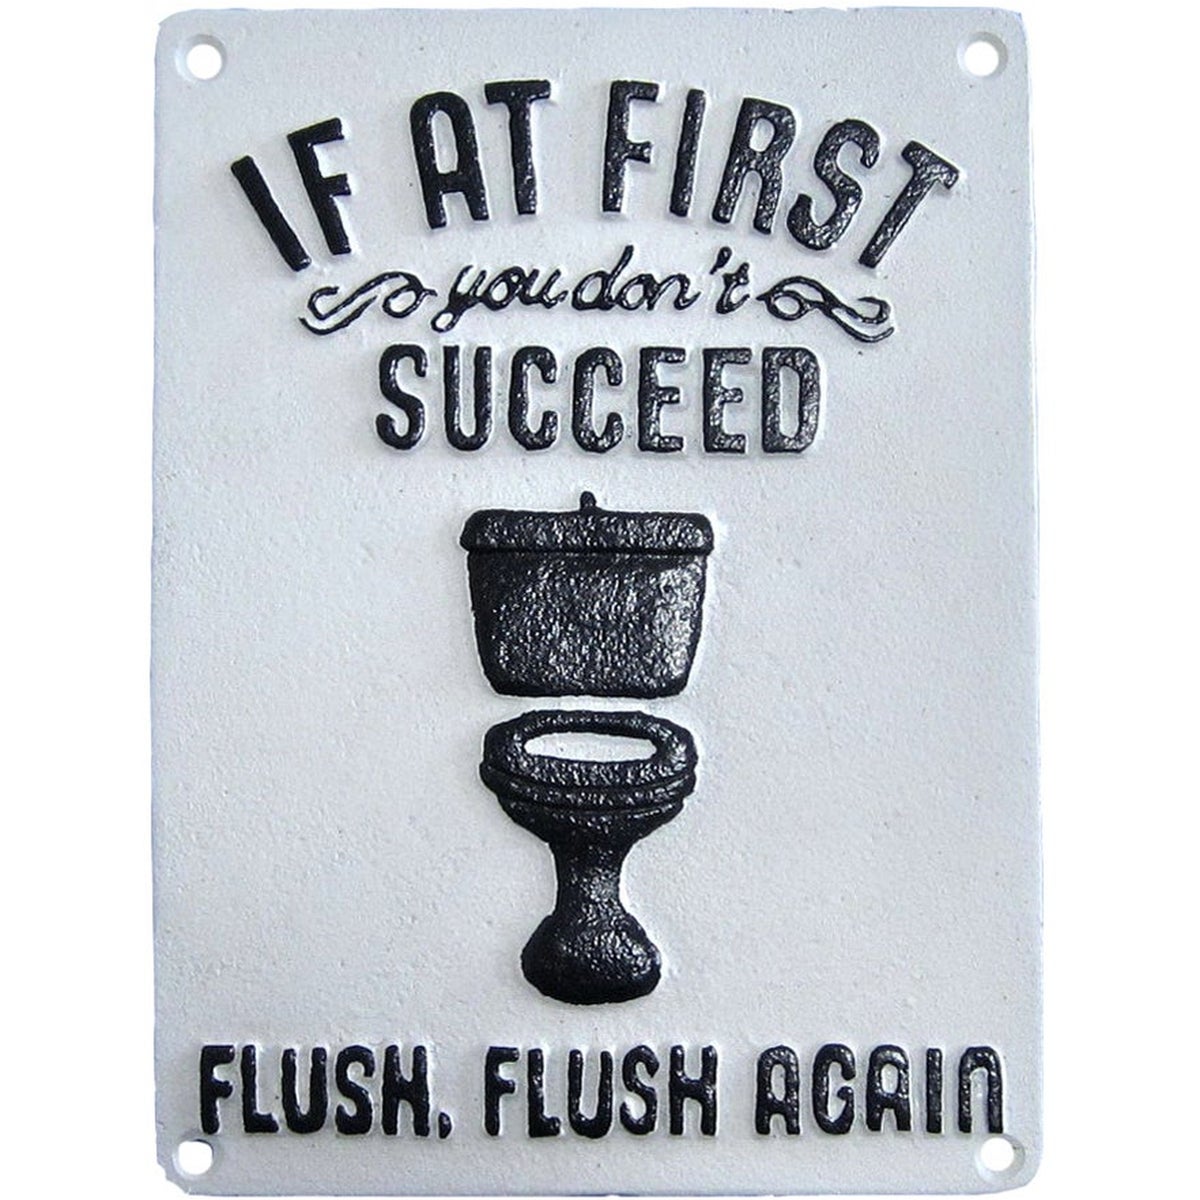 "~If At First You Don't Succed Flush, Flush Again~ White"